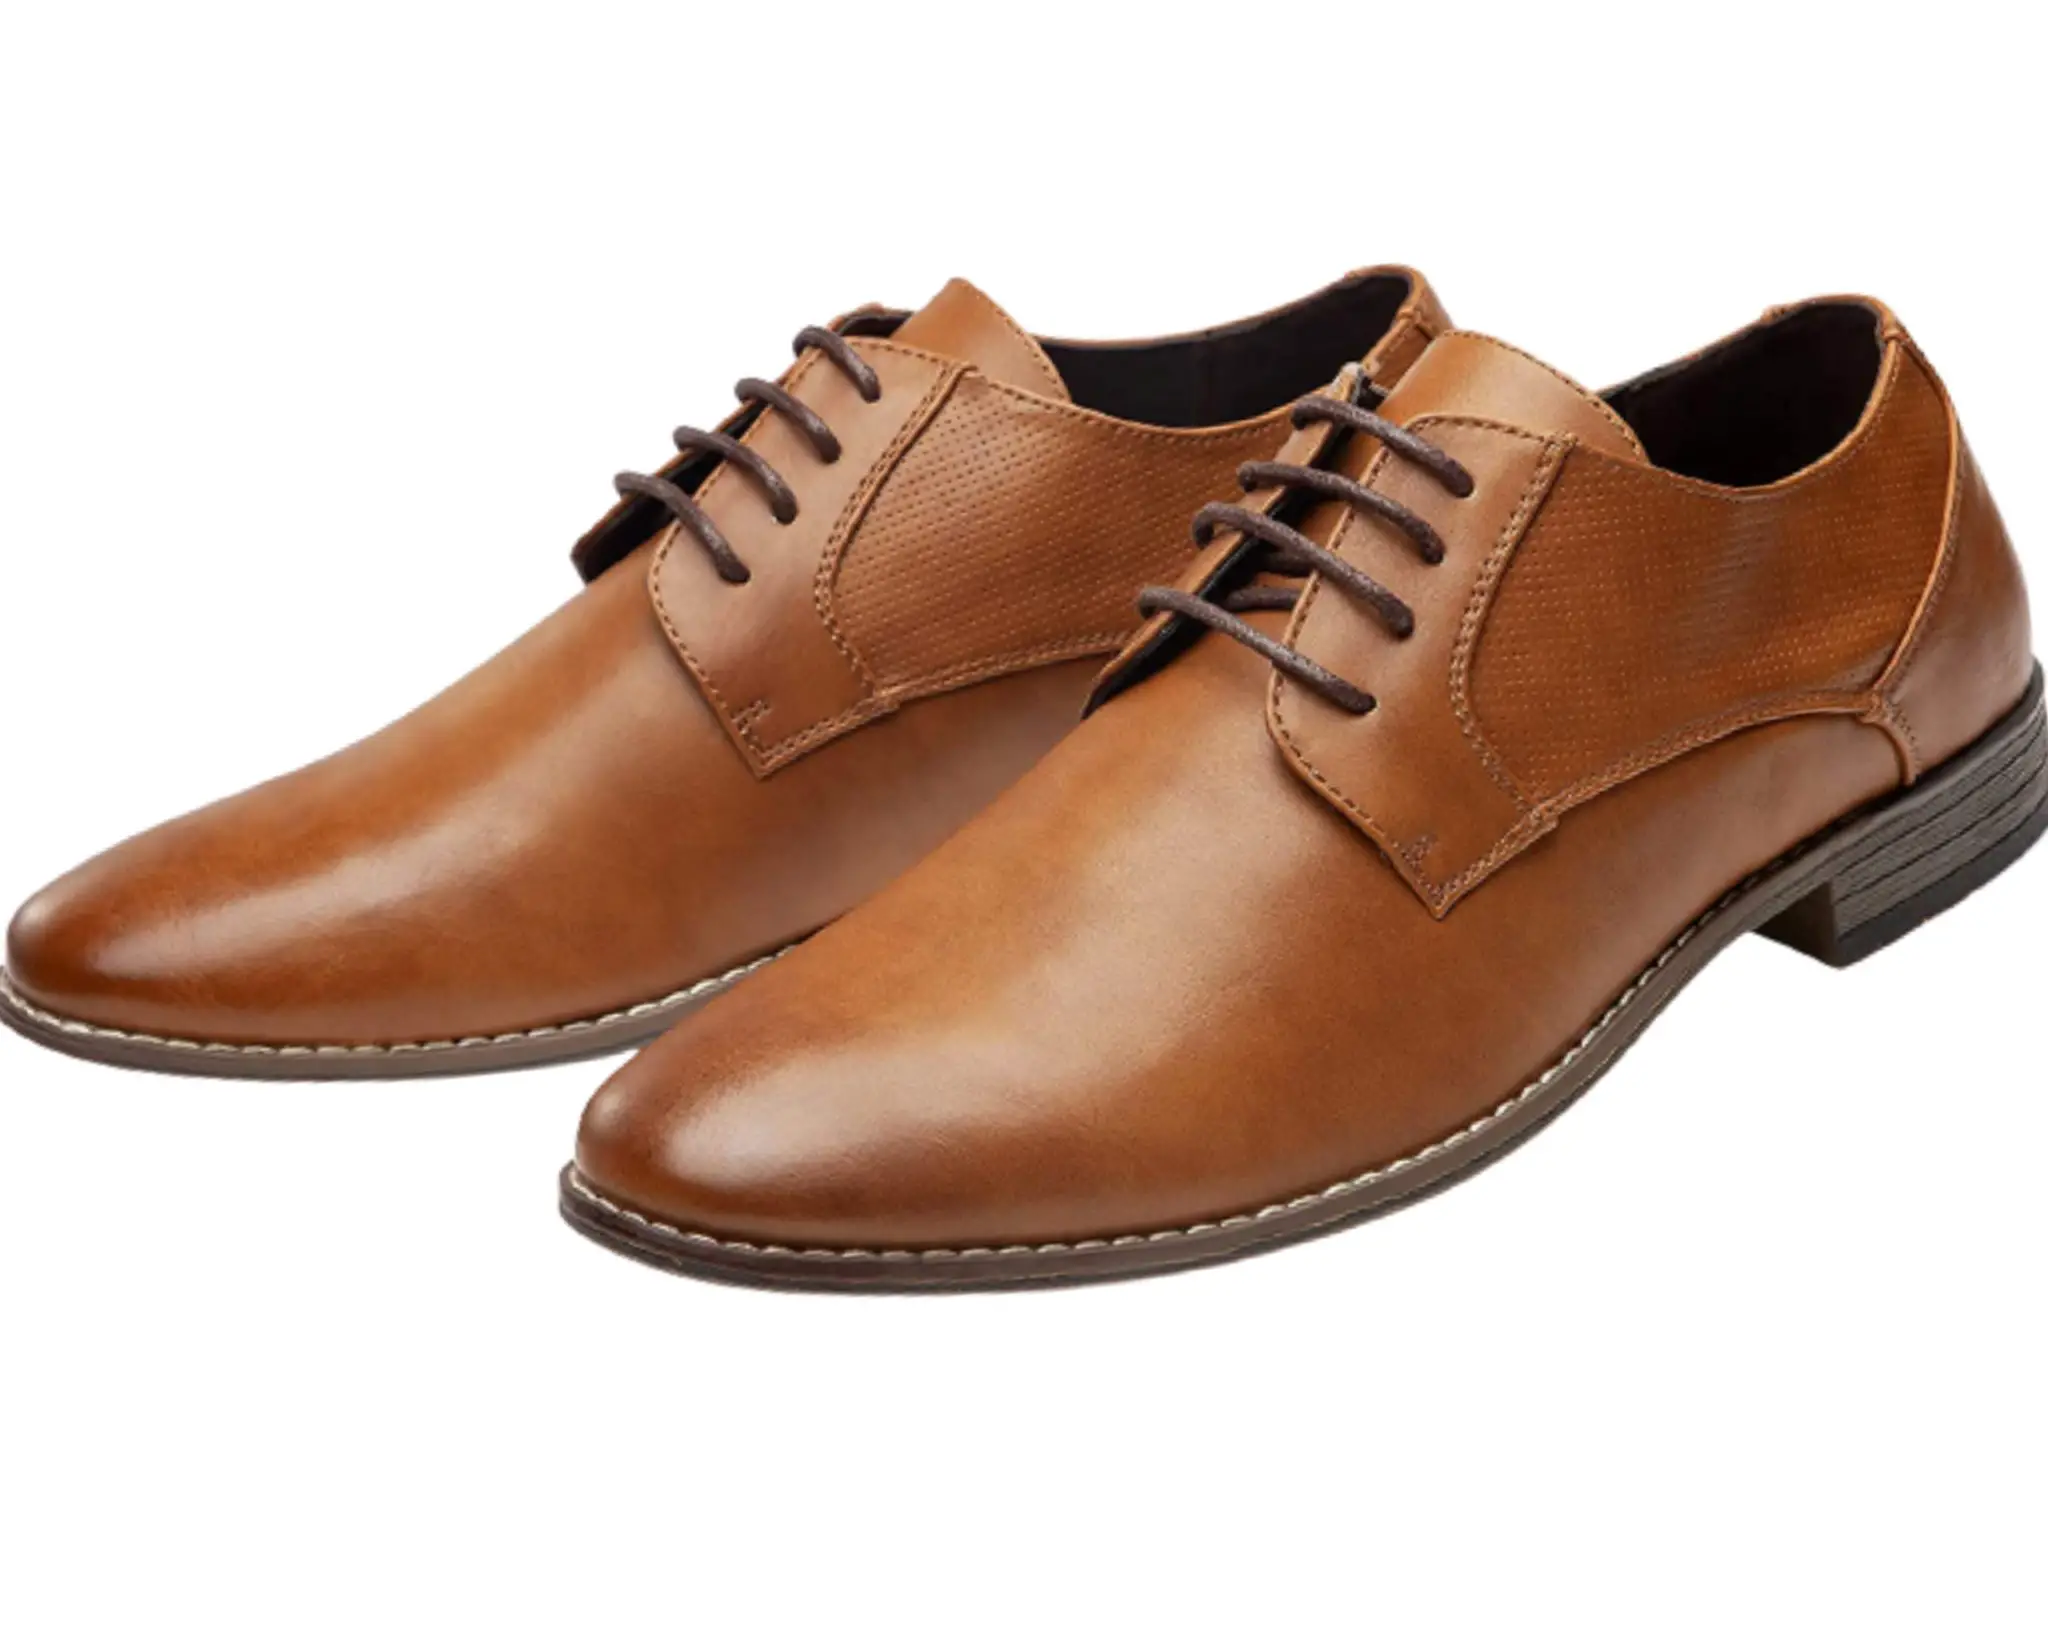 Best 15 Brown Dress Shoes for Men in 2022 | Shoe Habour